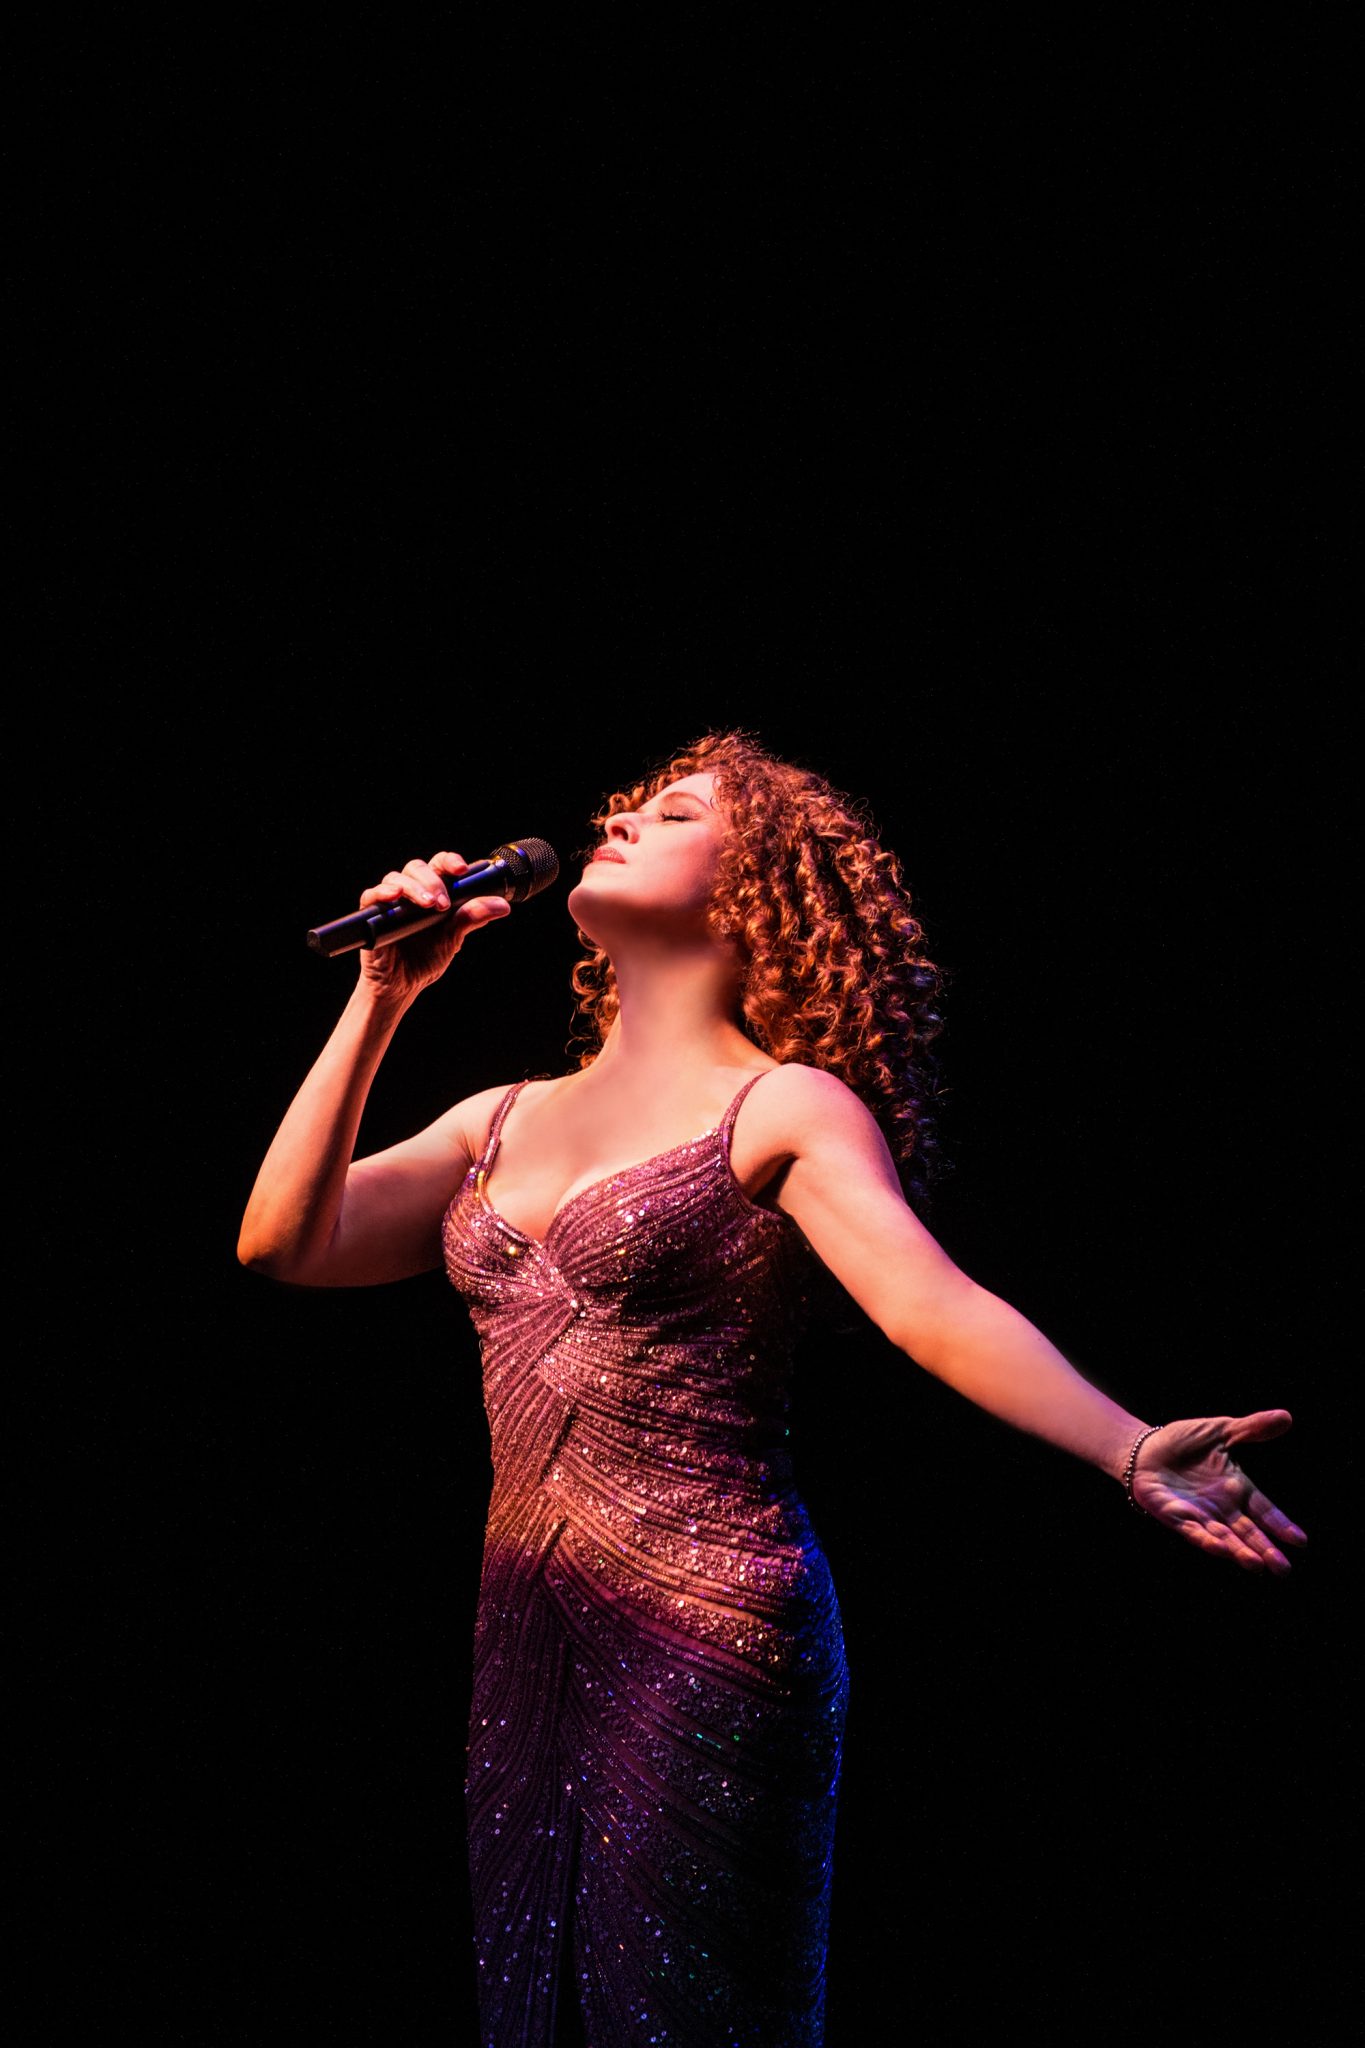 Bernadette Peters singing passionately into a microphone on a dark stage, spotlight highlighting her expressive stance.